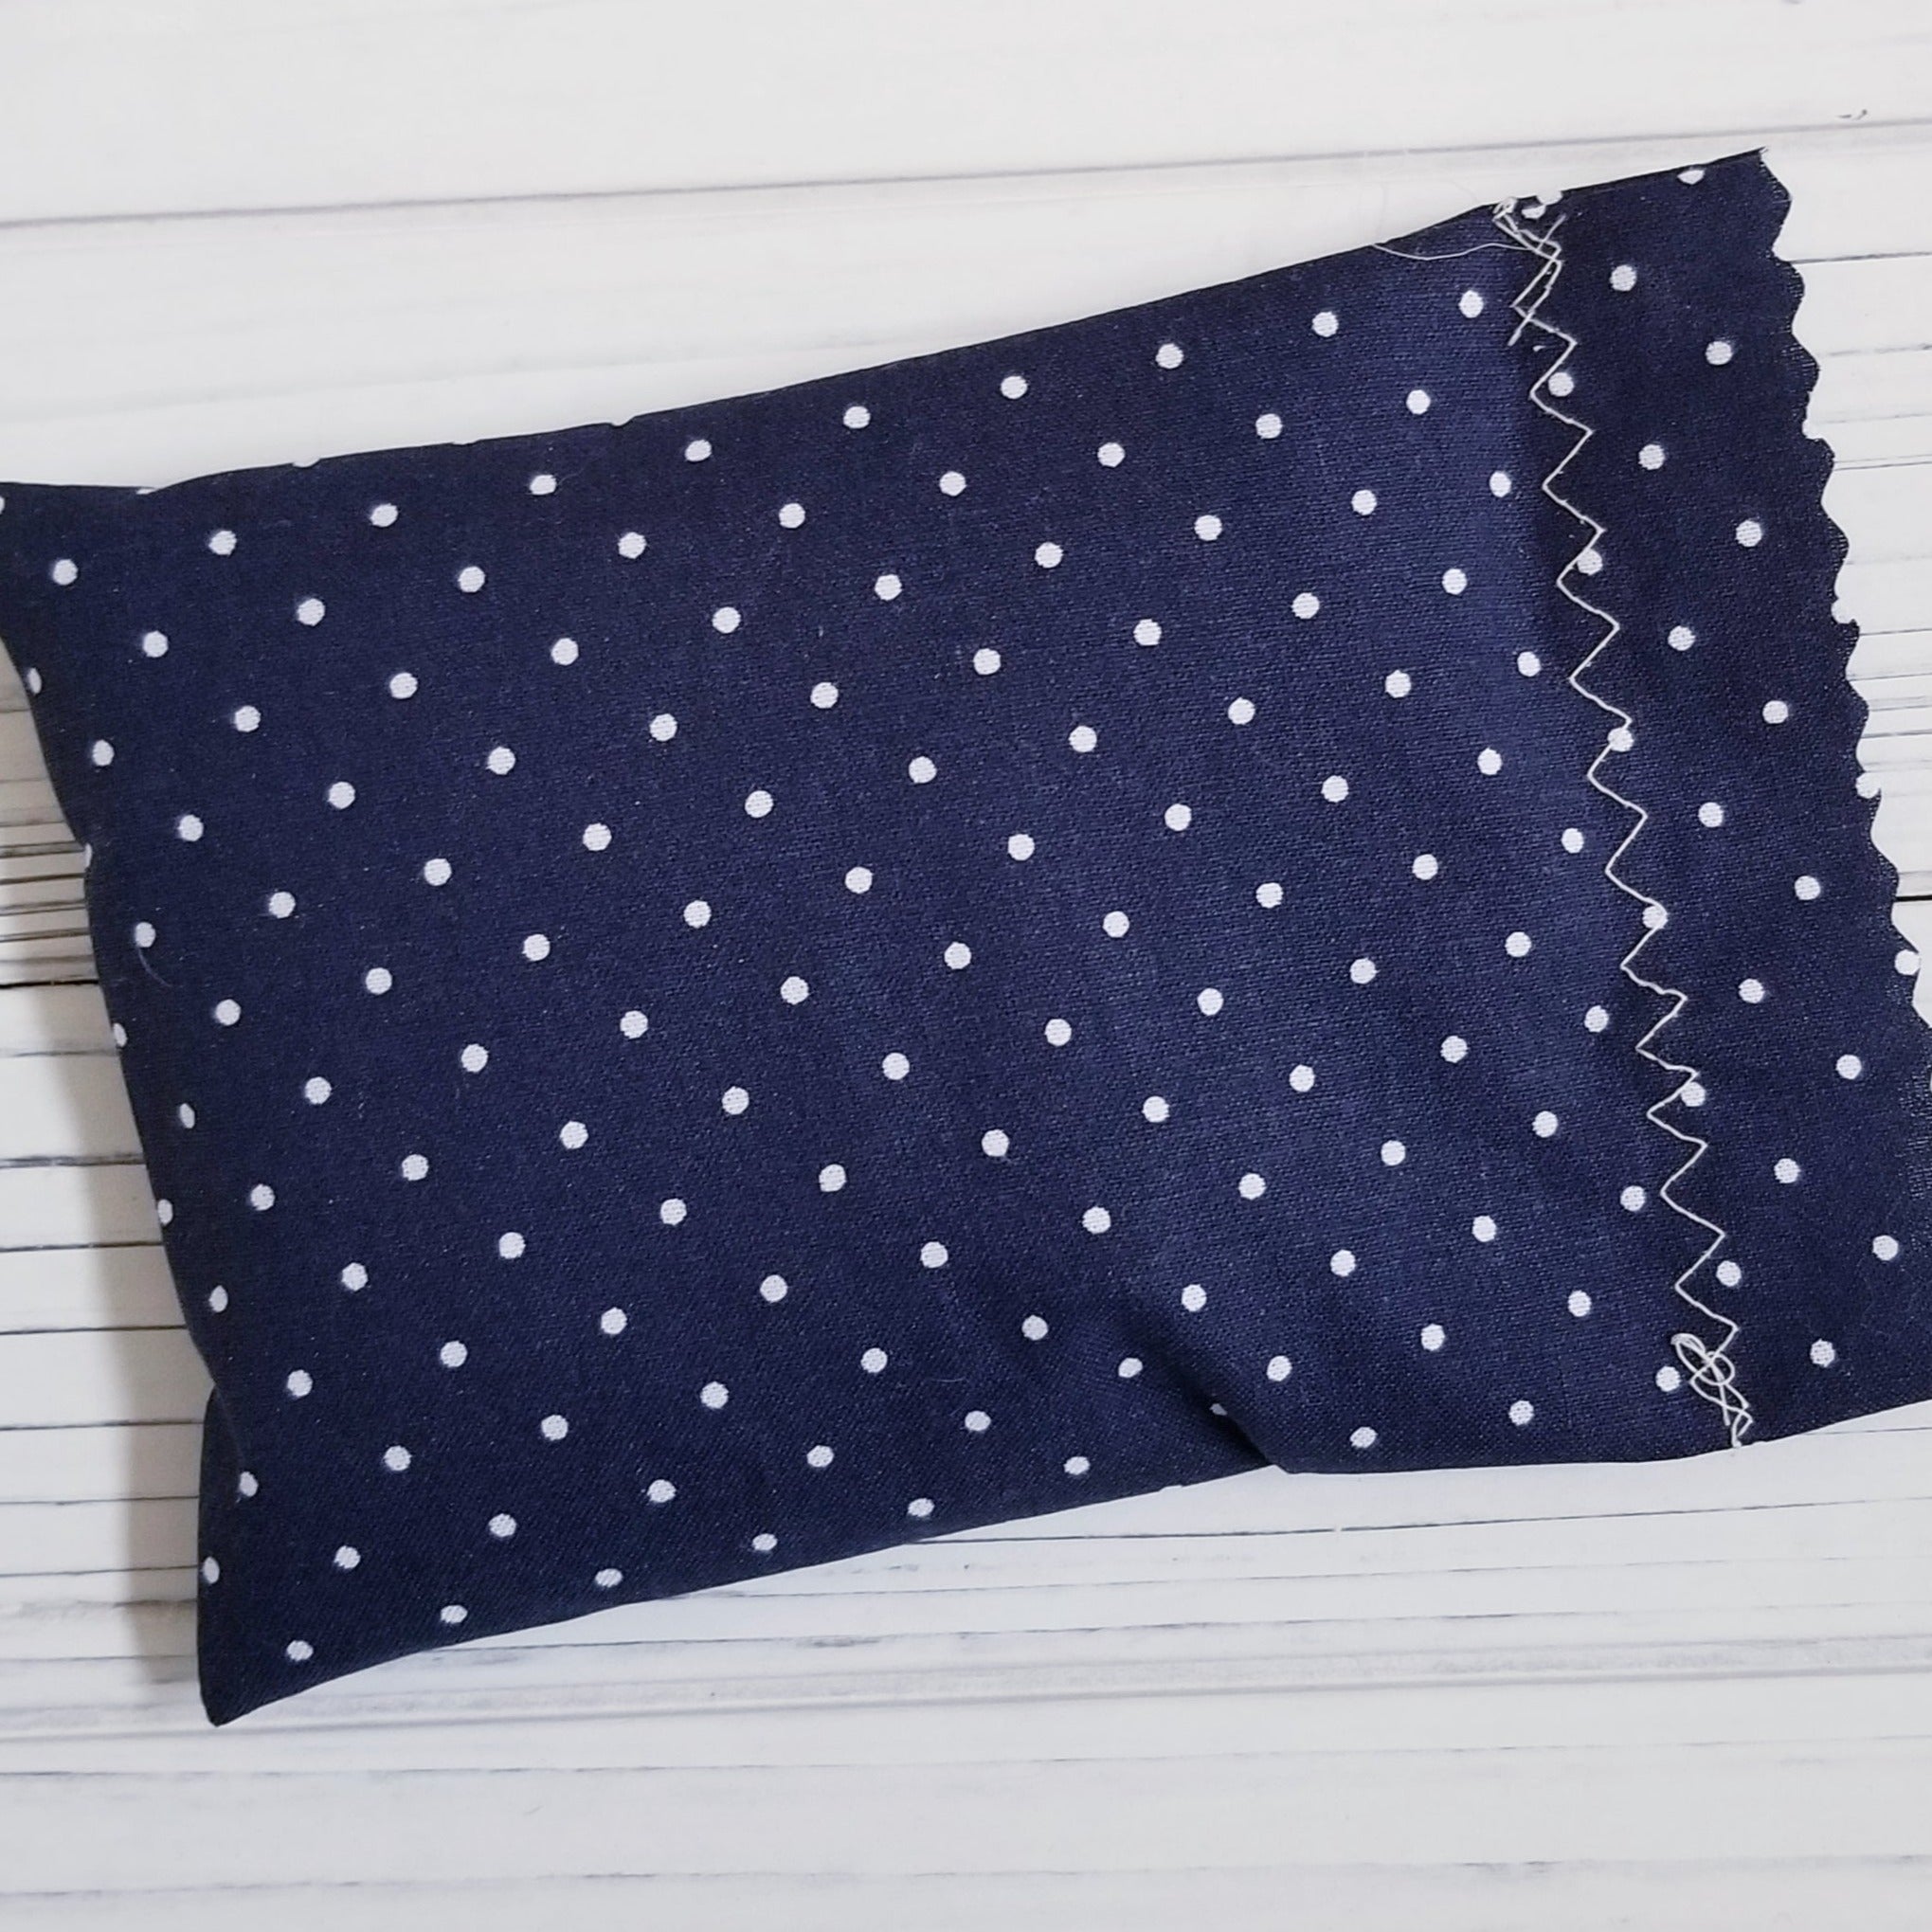 herbal dream pillow navy blue with white dots